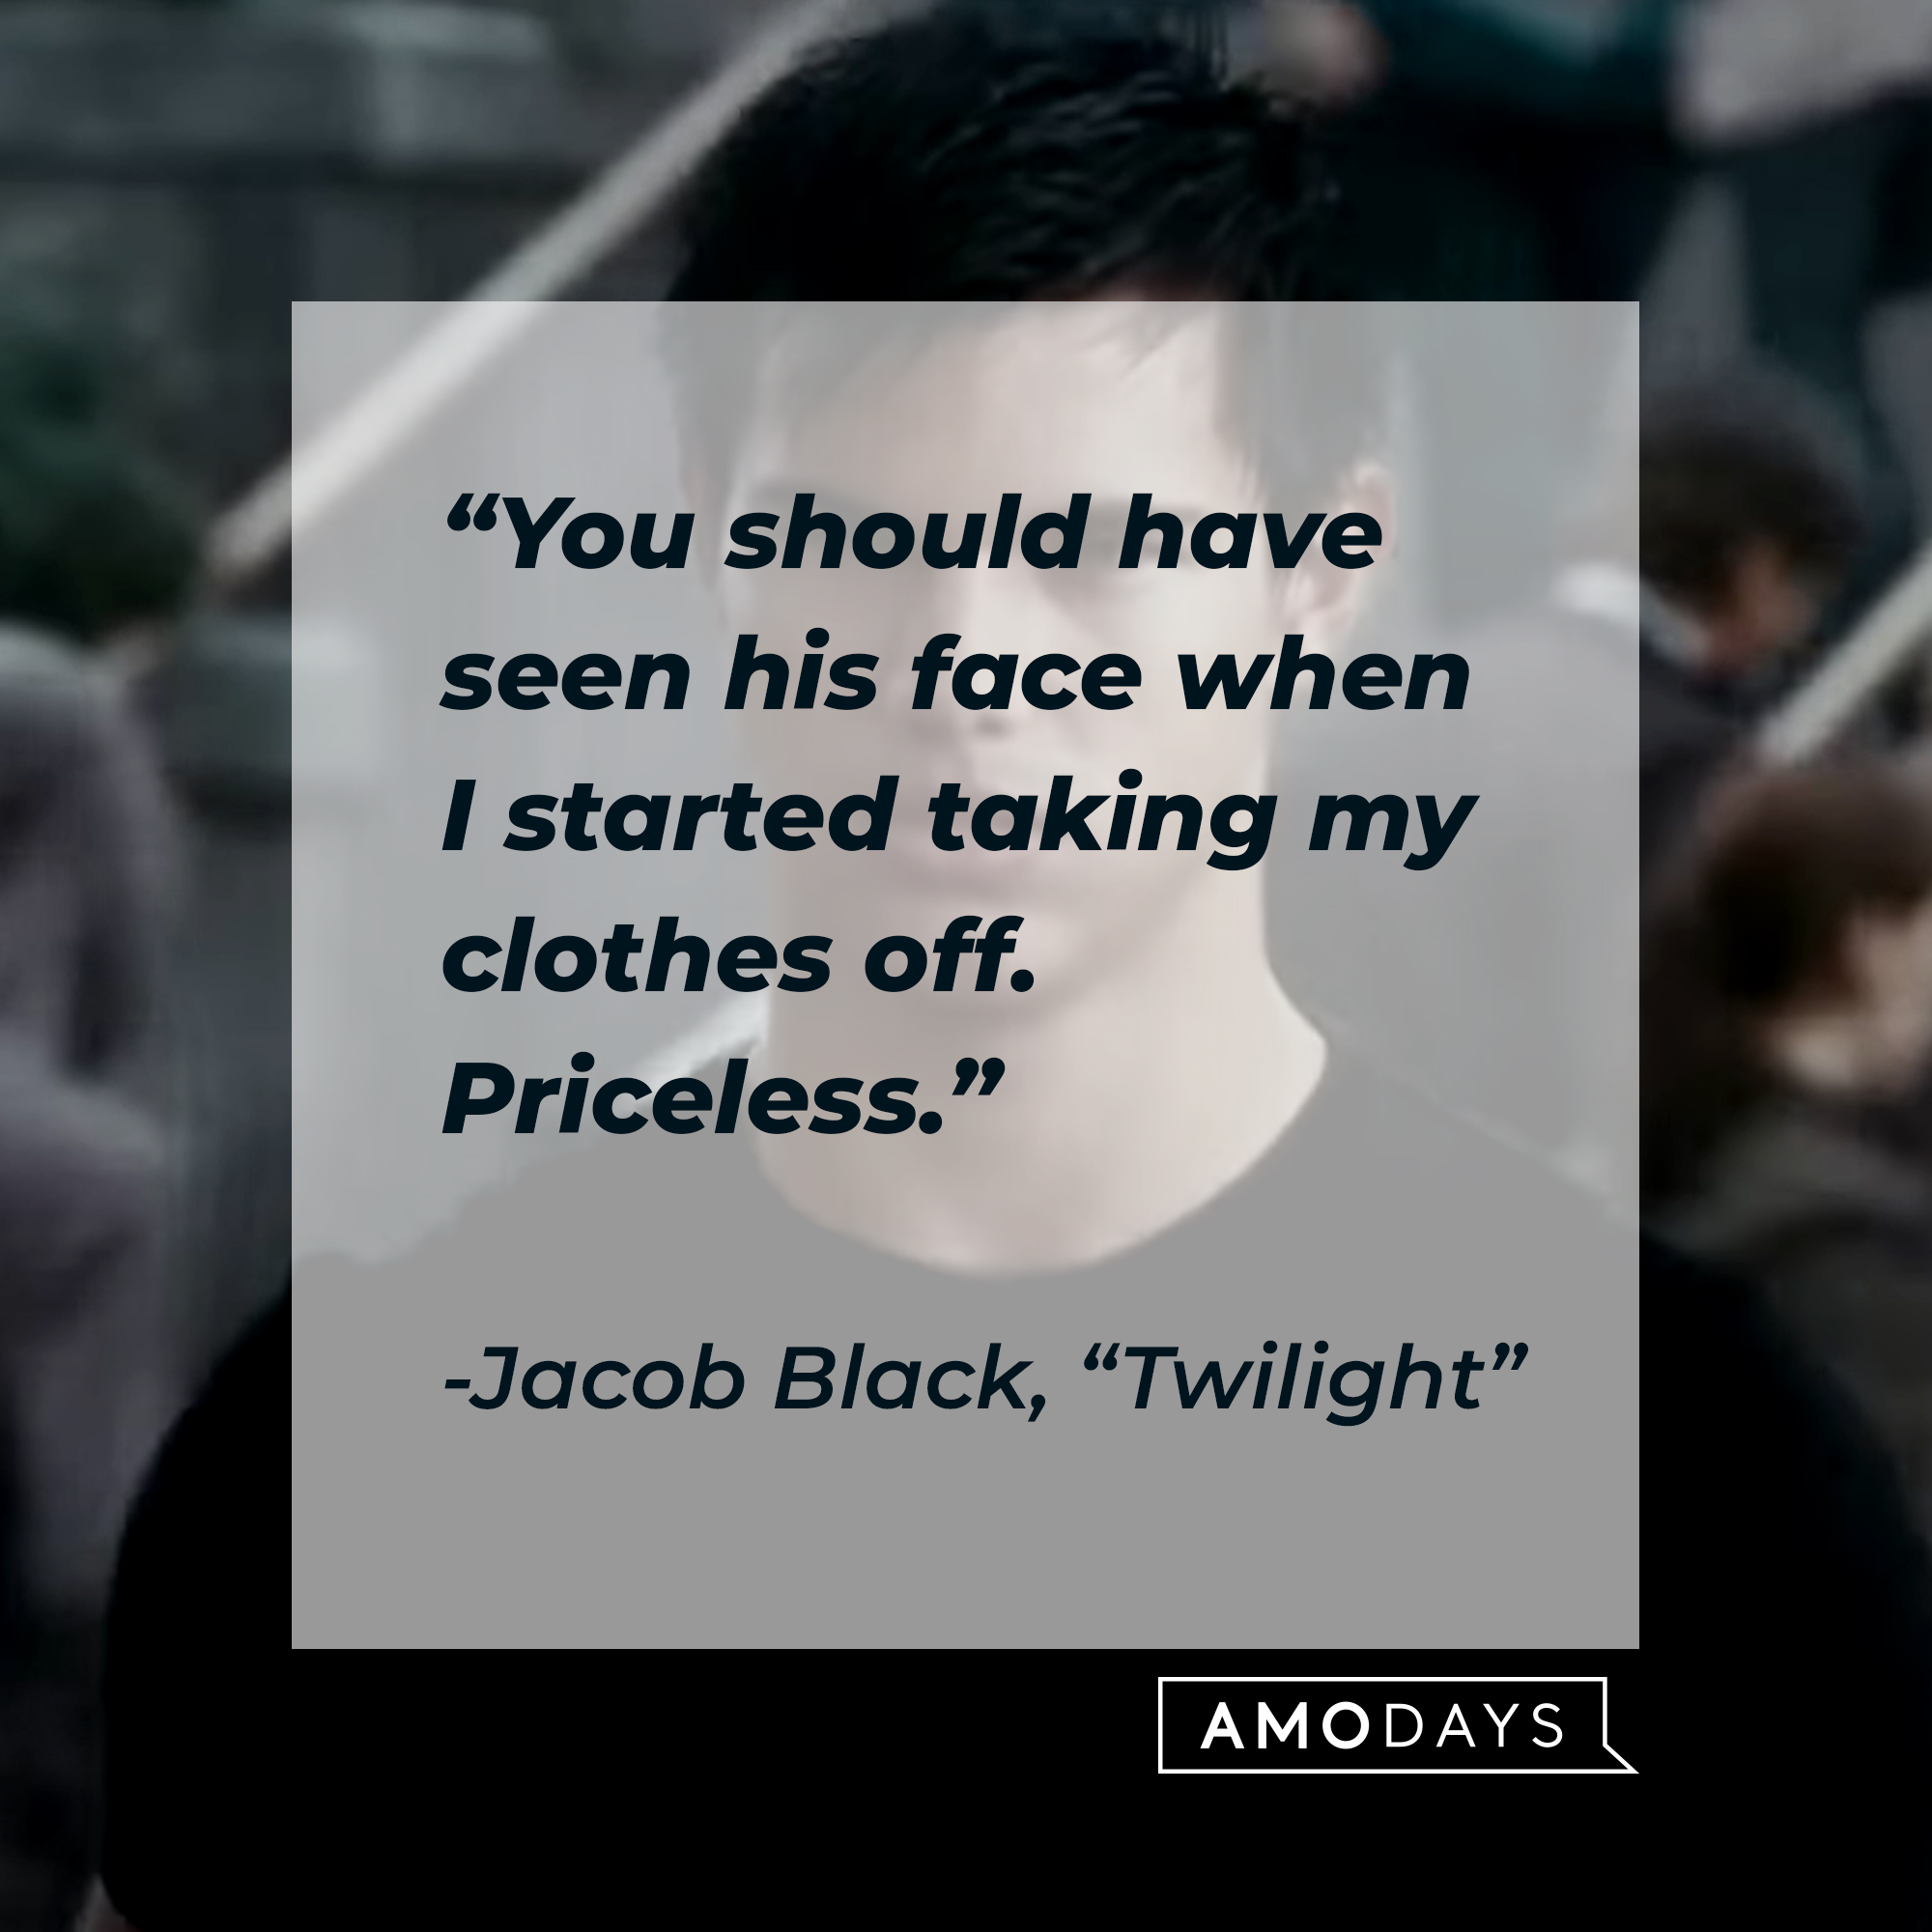 Image of Jacob Black with his quote in "Twilight:" “You should have seen his face when I started taking my clothes off. Priceless.” | Source: Facebook.com/twilight